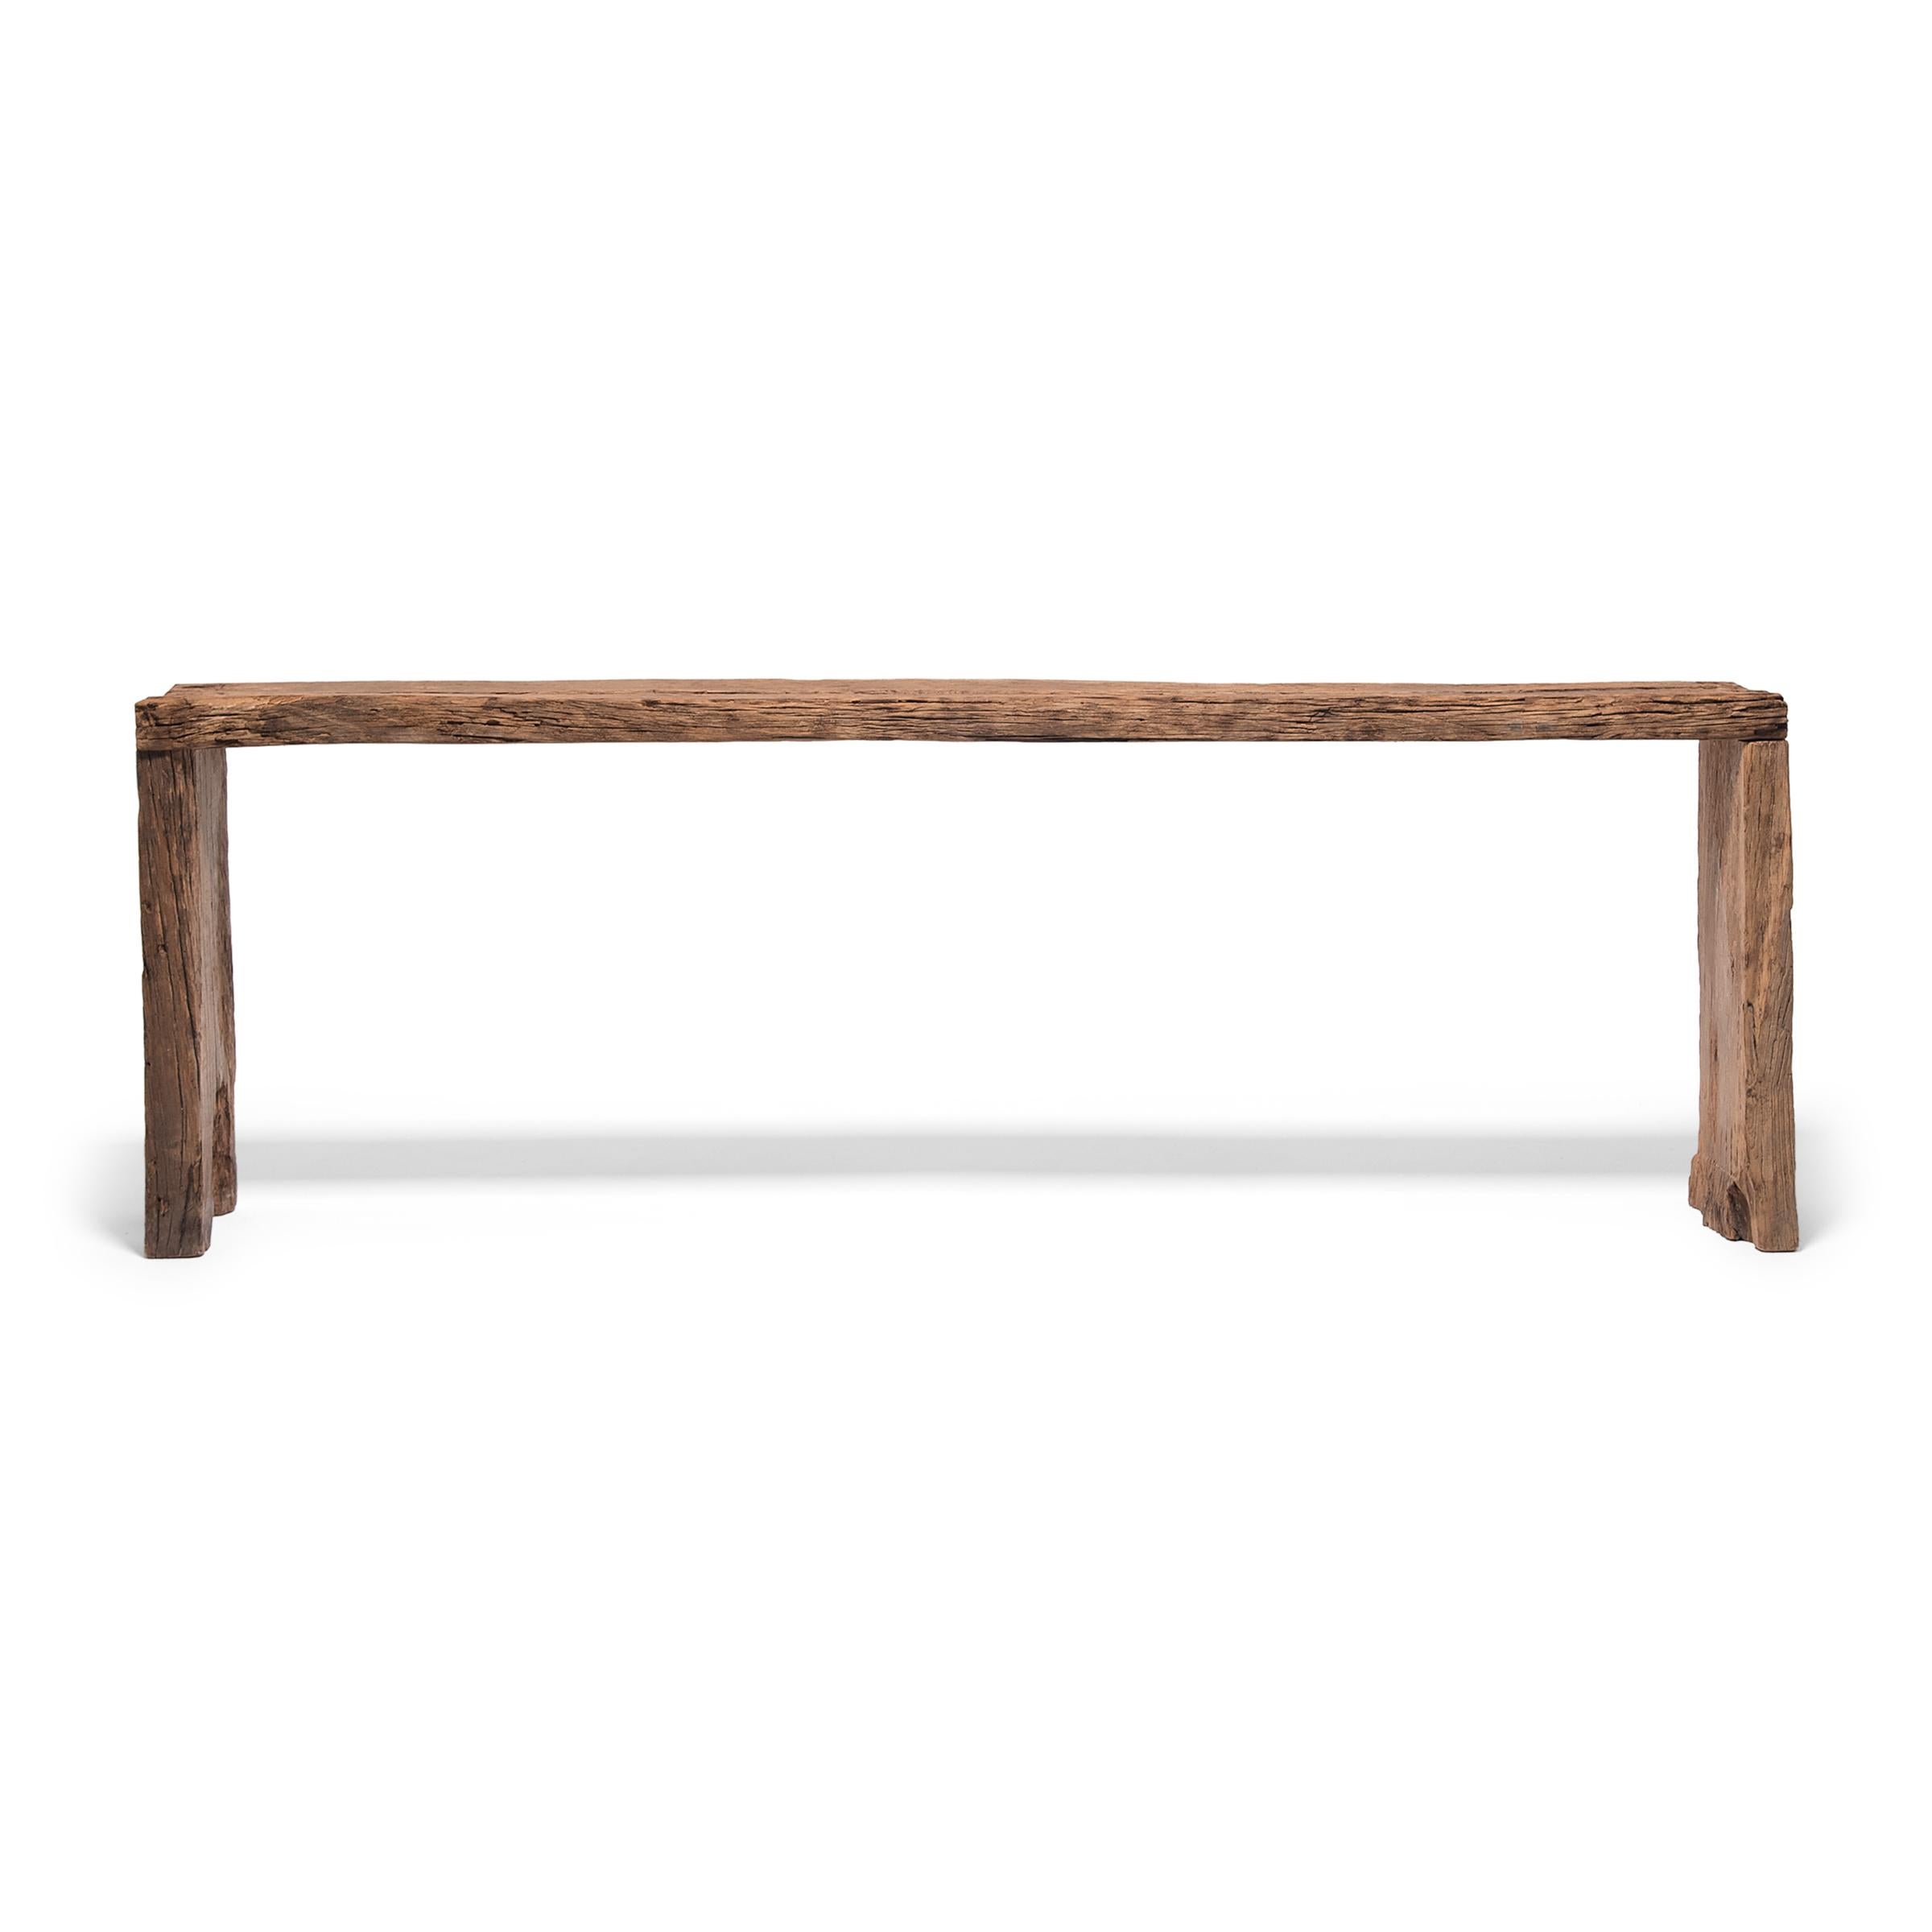 Chinese Reclaimed Elm Waterfall Console Table